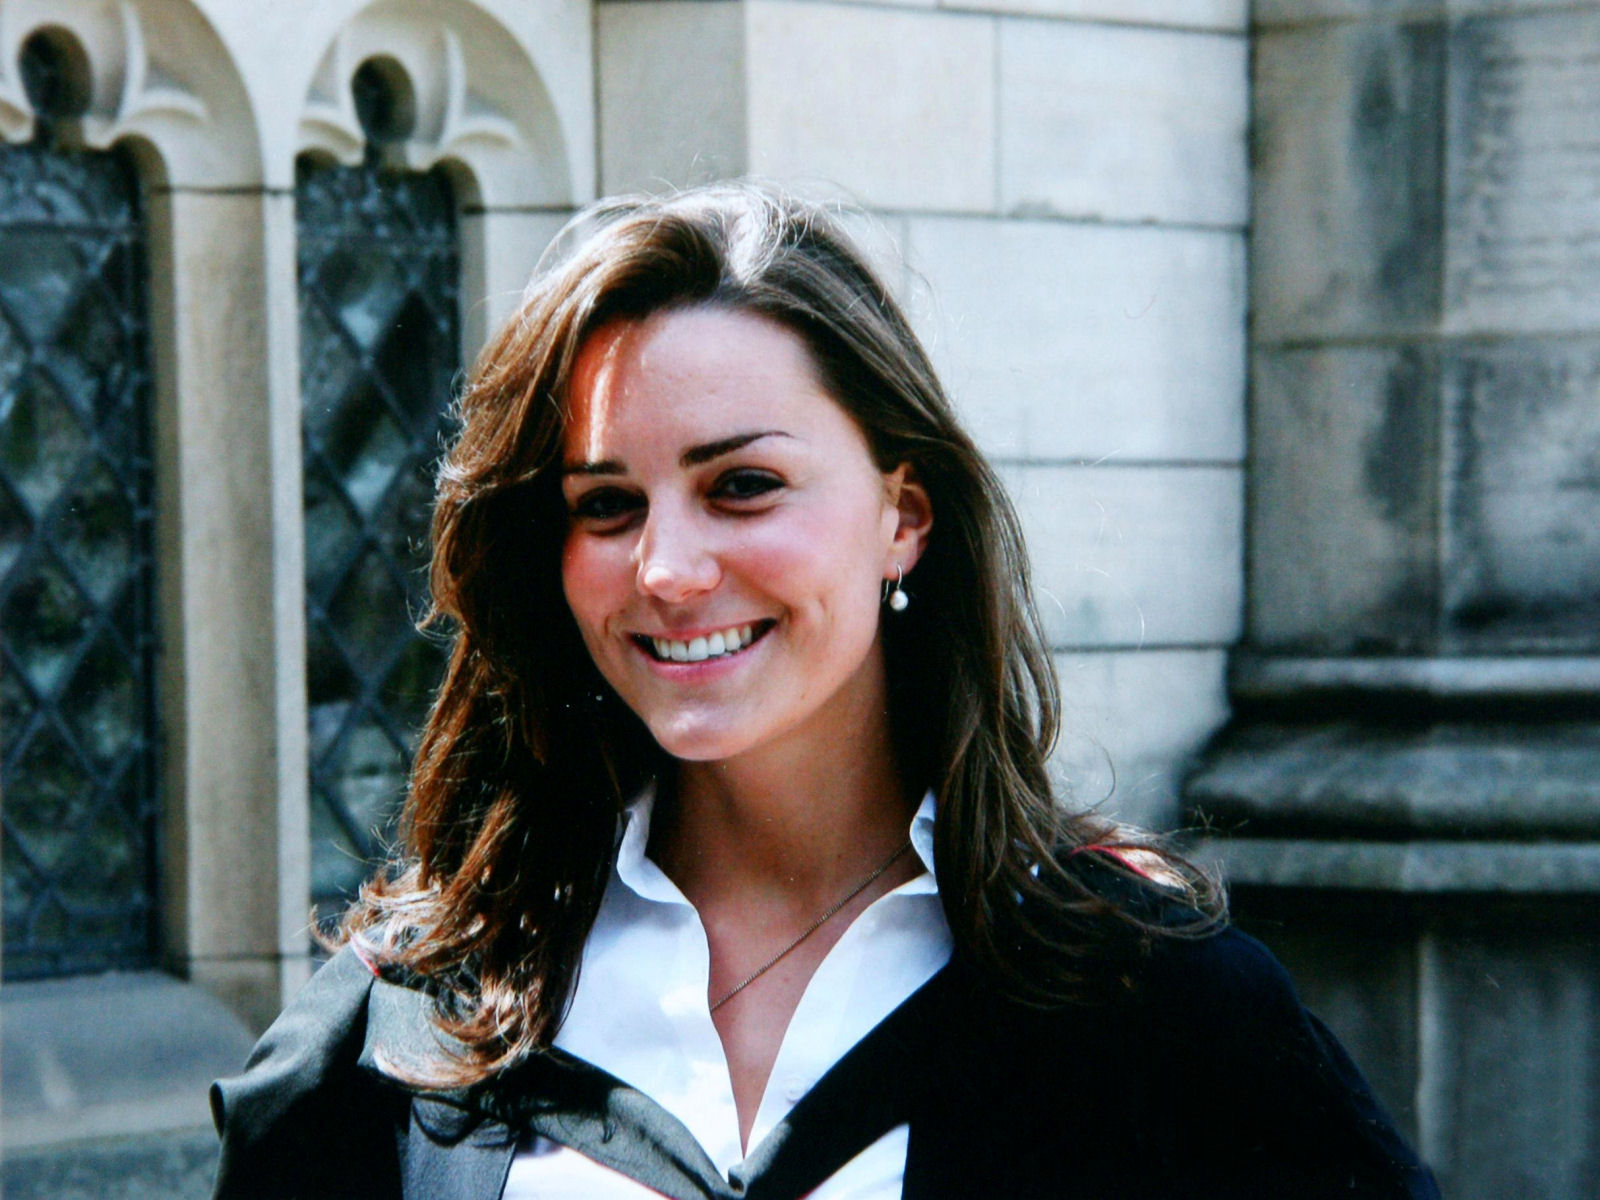 Kate Middleton Wallpaper |Clickandseeworld is all about Funny|Amazing|pictures ...1600 x 1200